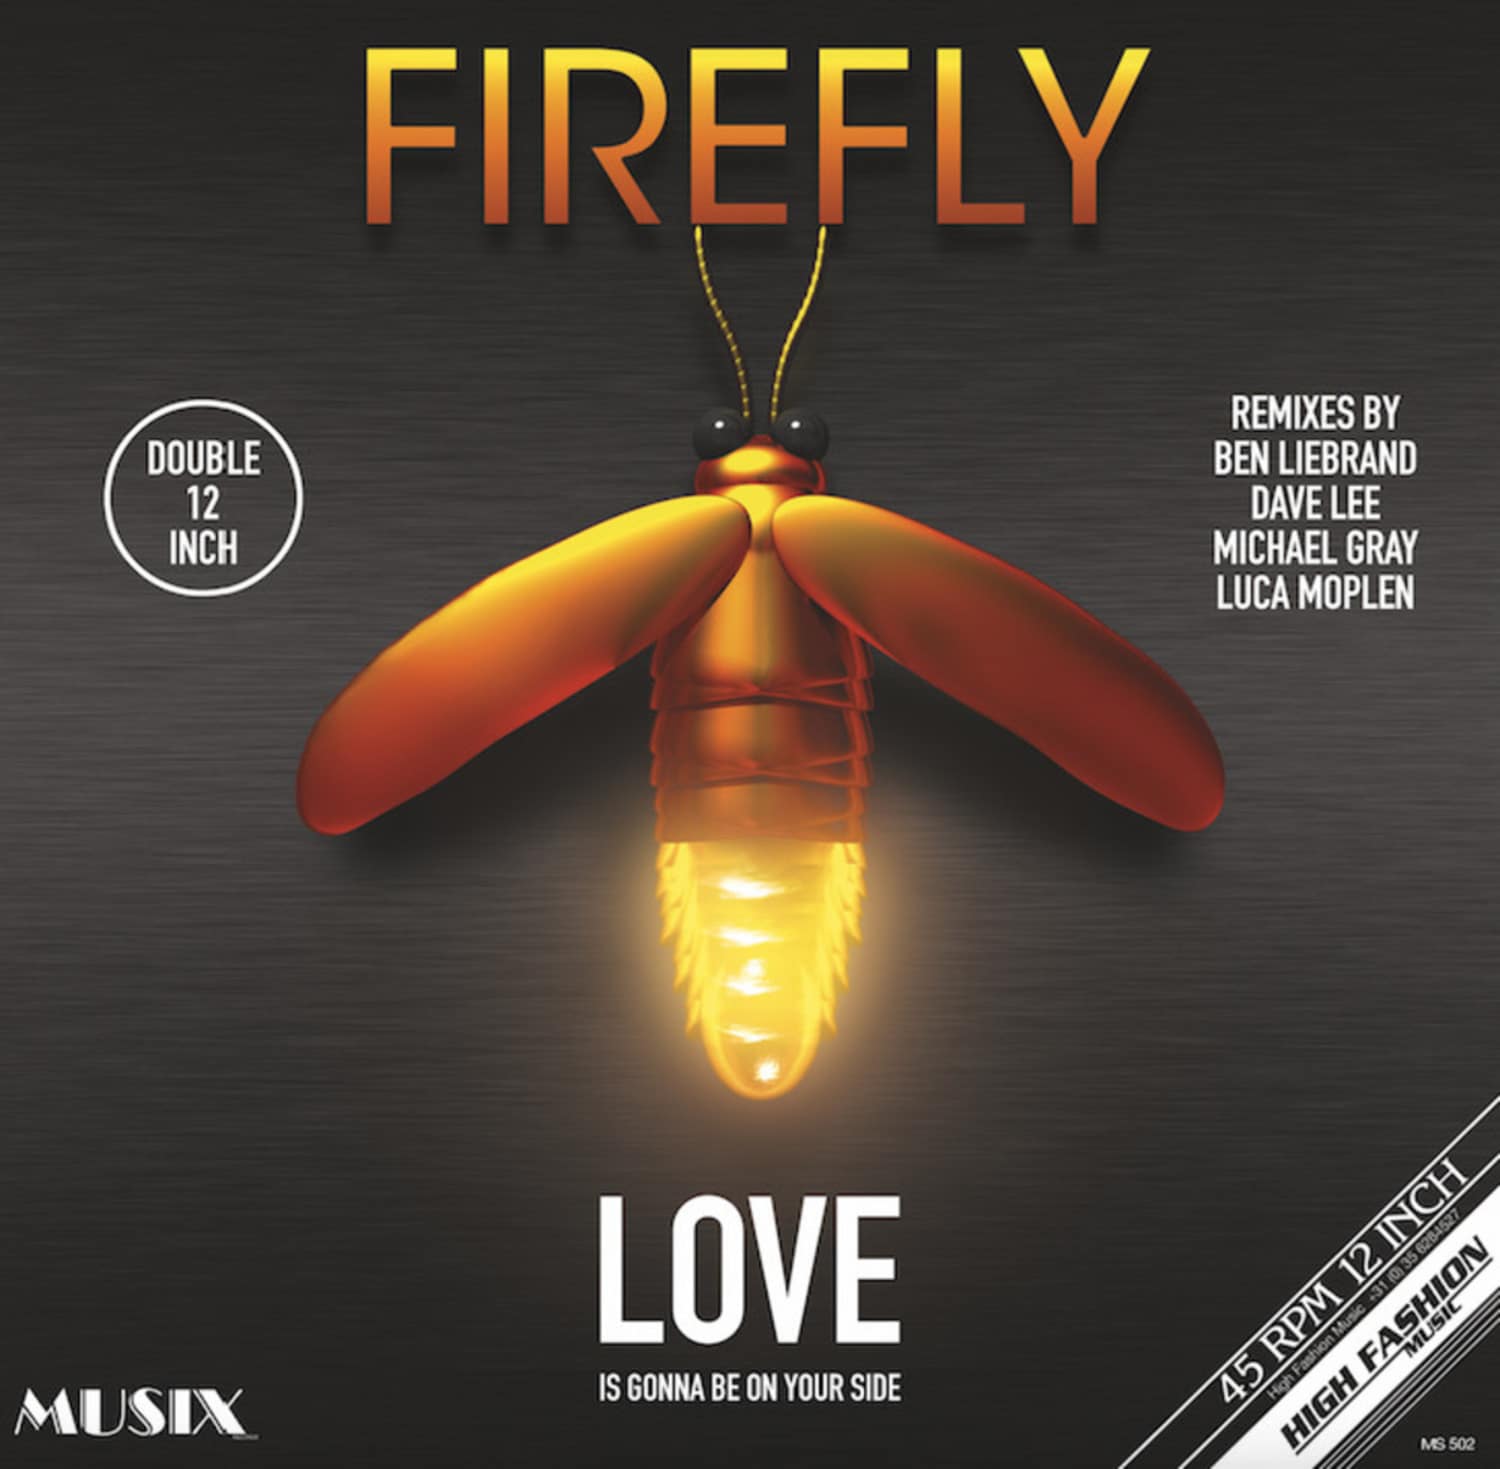 Firefly - LOVE IS GONNA BE ON YOUR SIDE 